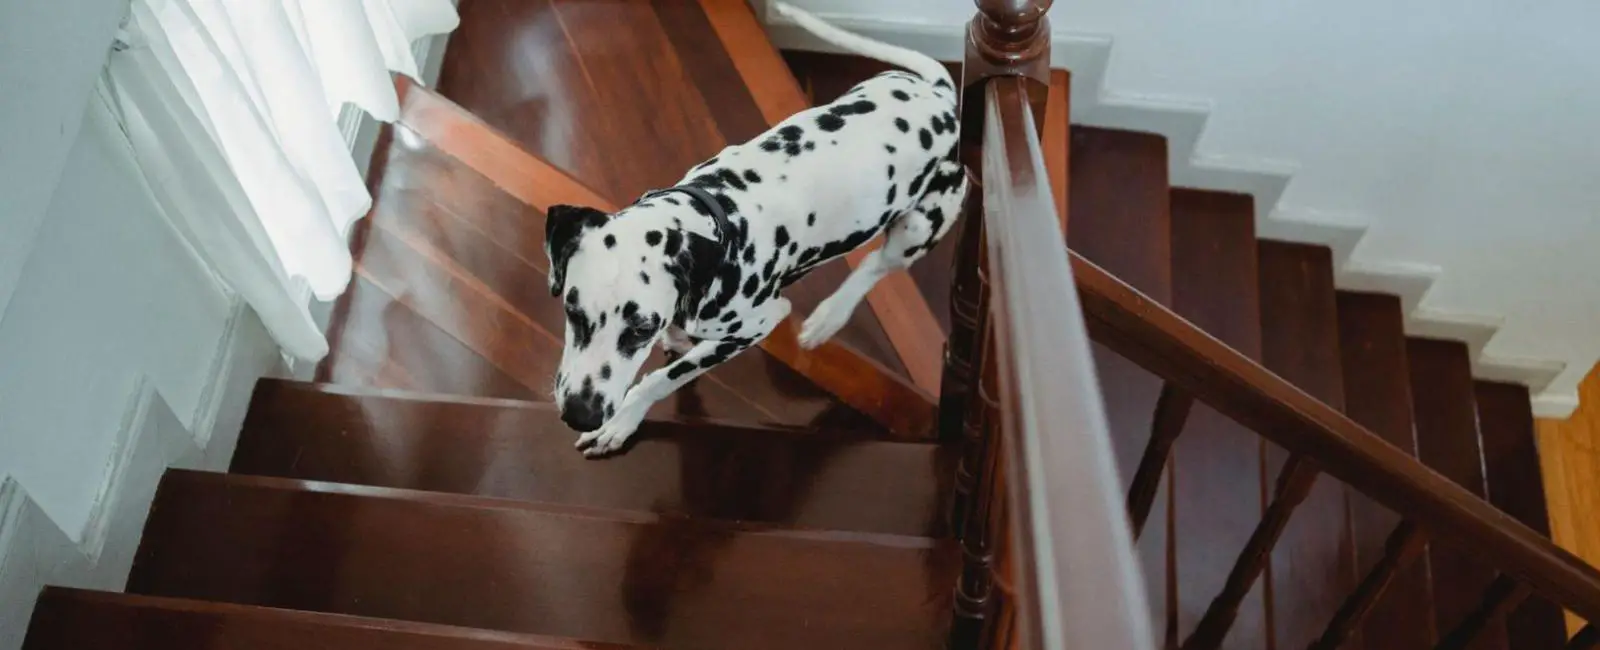 how to get dogs to go down stairs